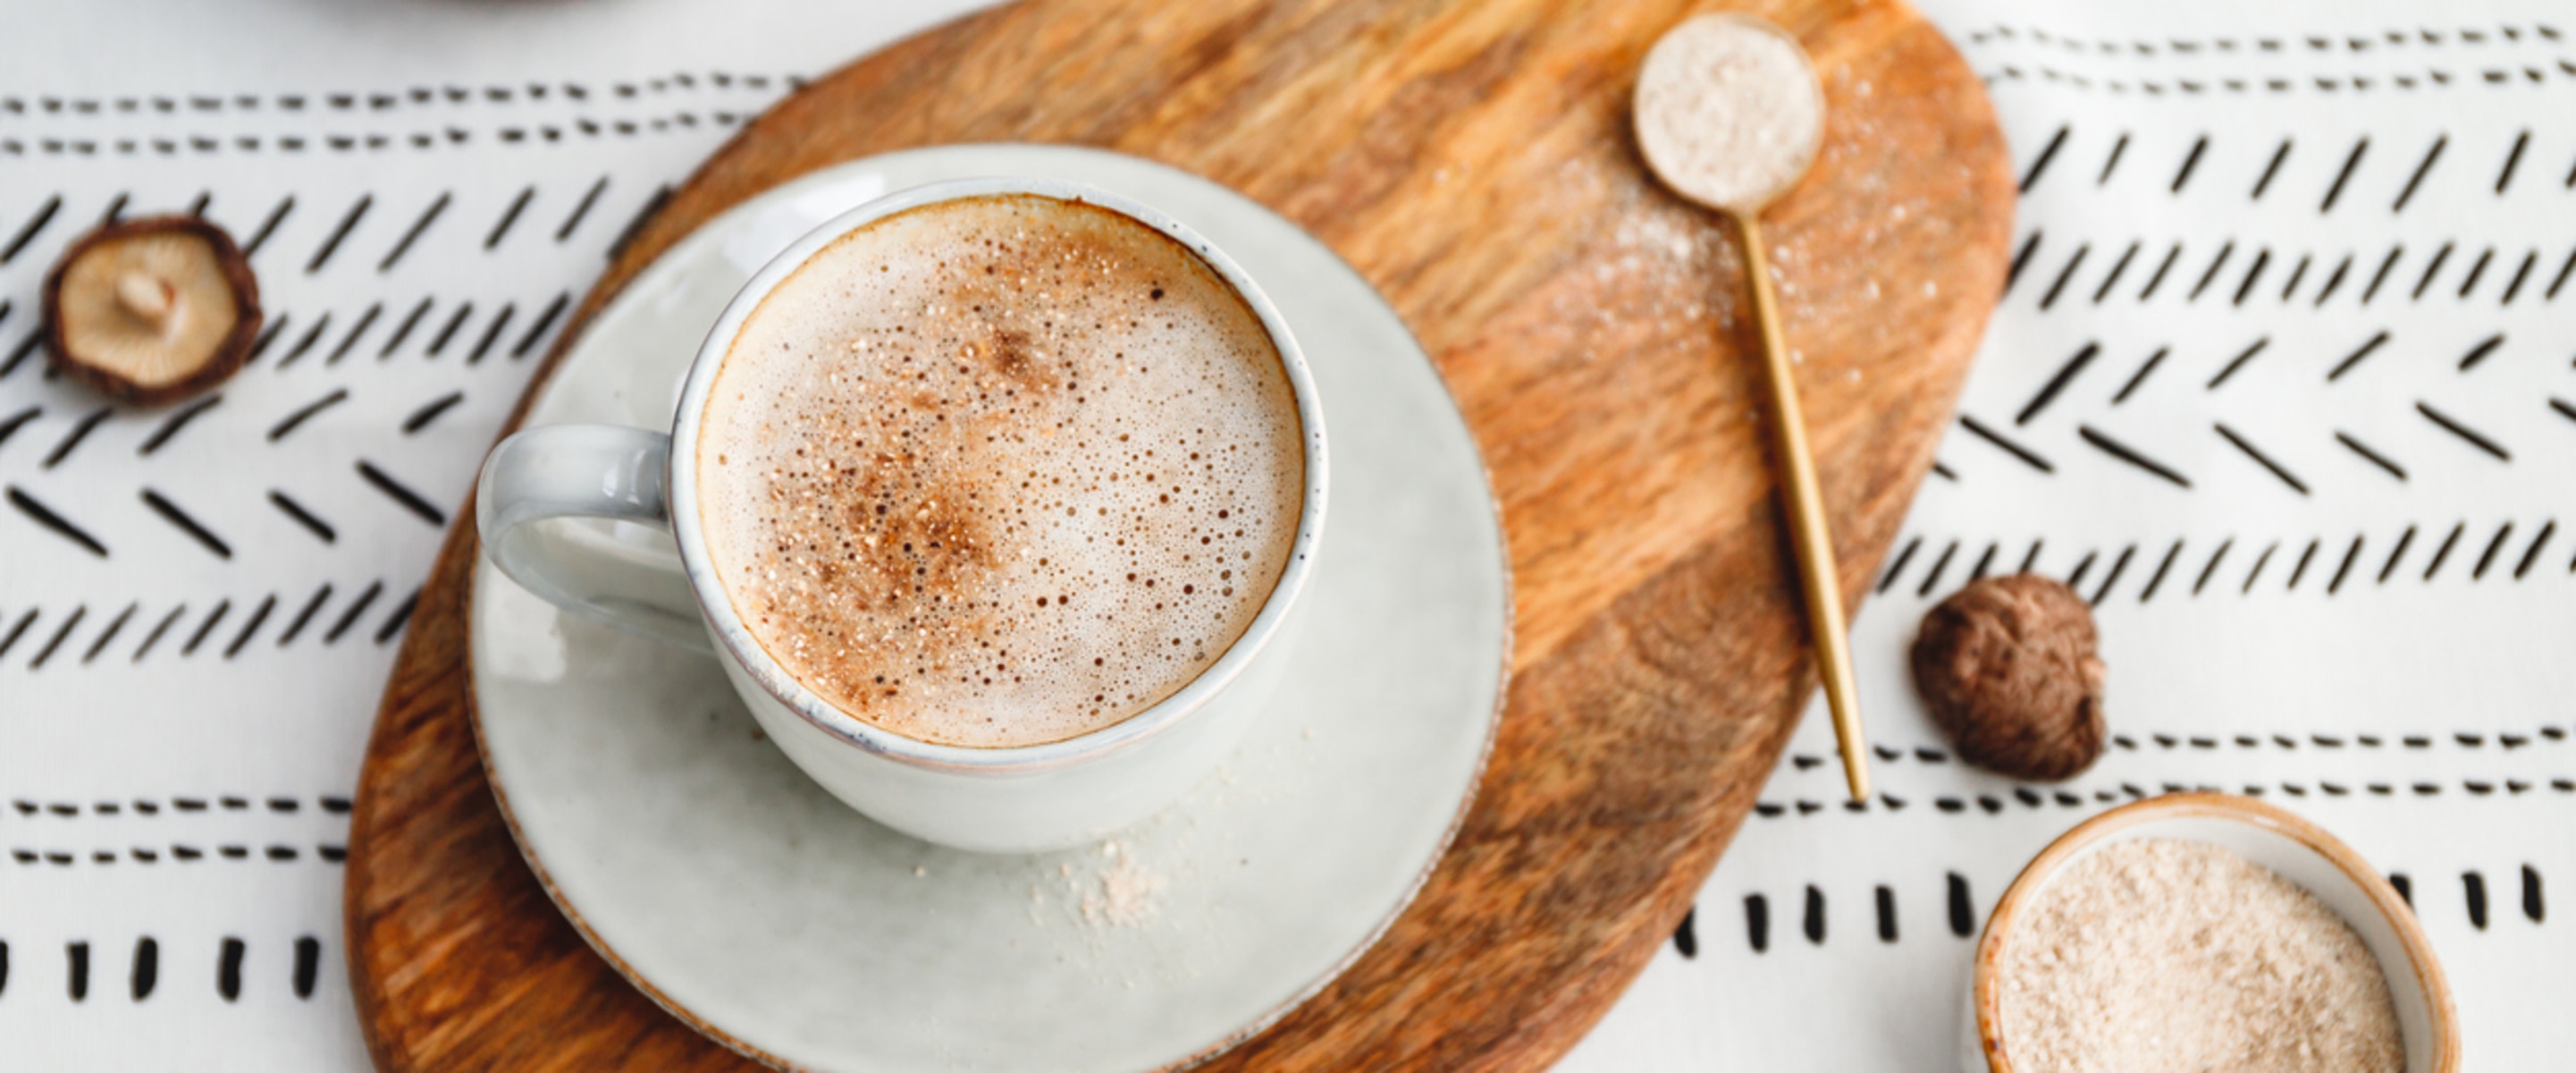 The Mushroom Coffee Trend Is Here to Stay: Ease Into It With These 7 Products